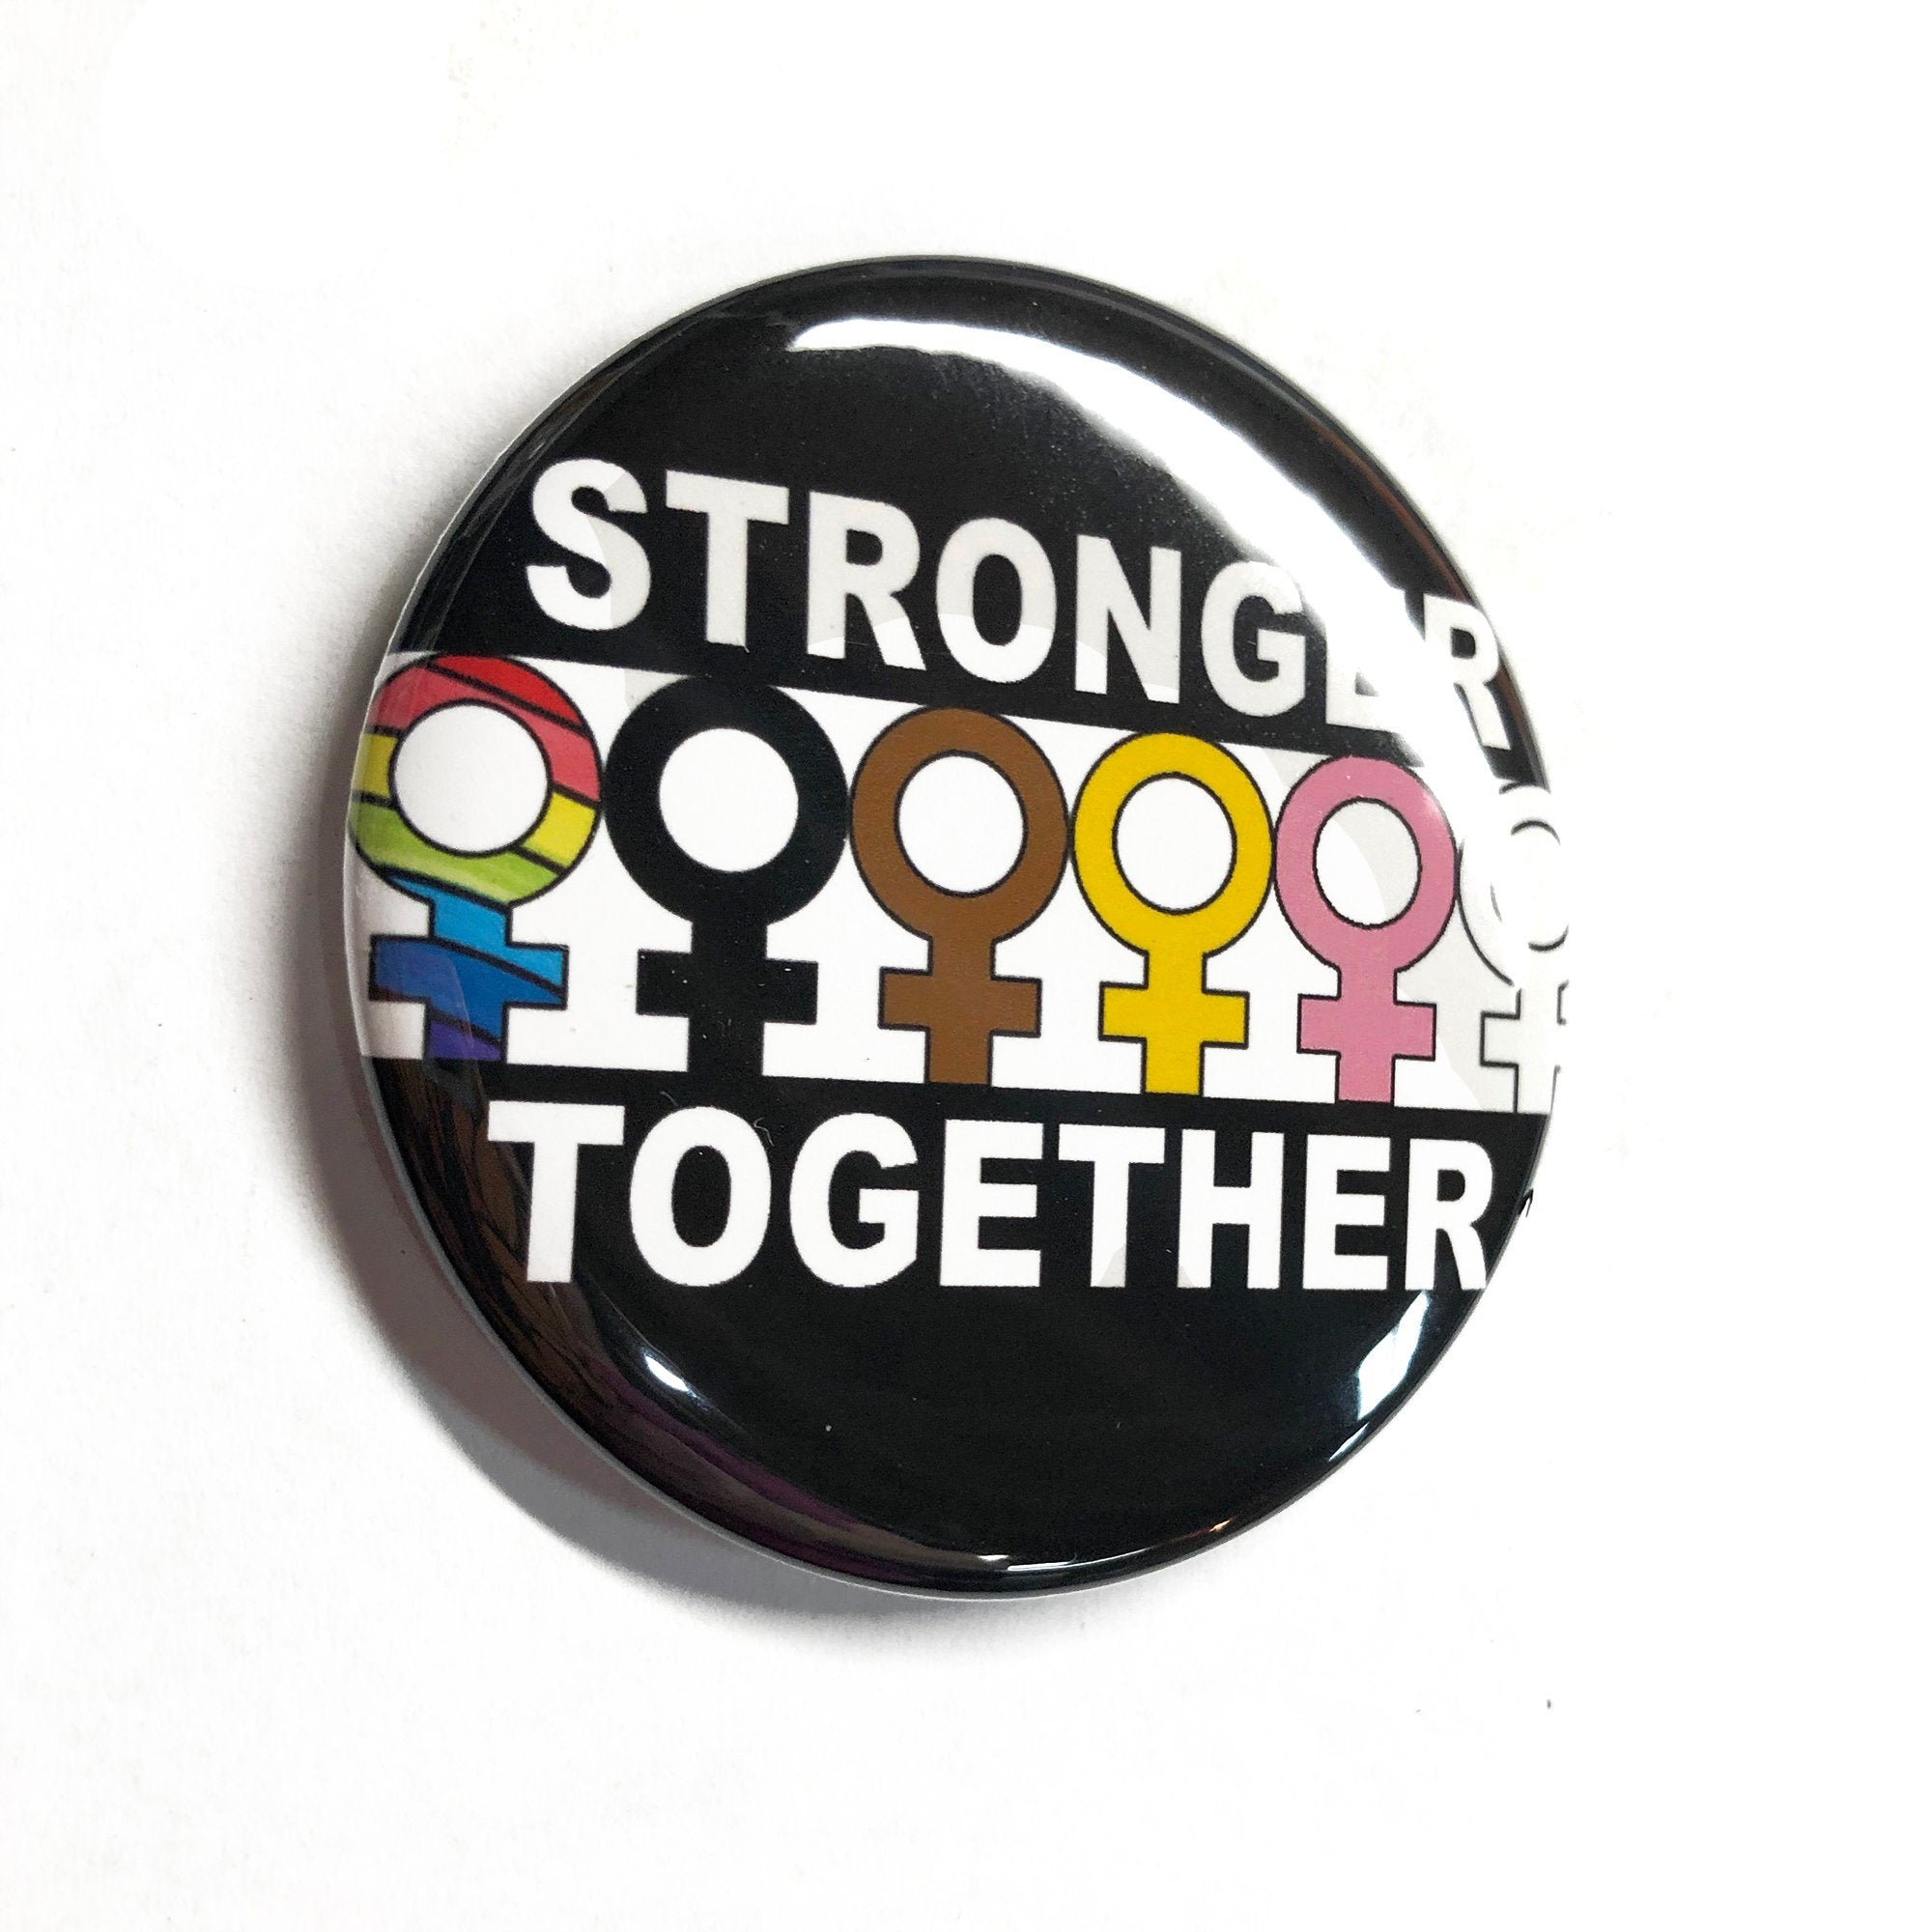 Stronger Together Pin or Magnet